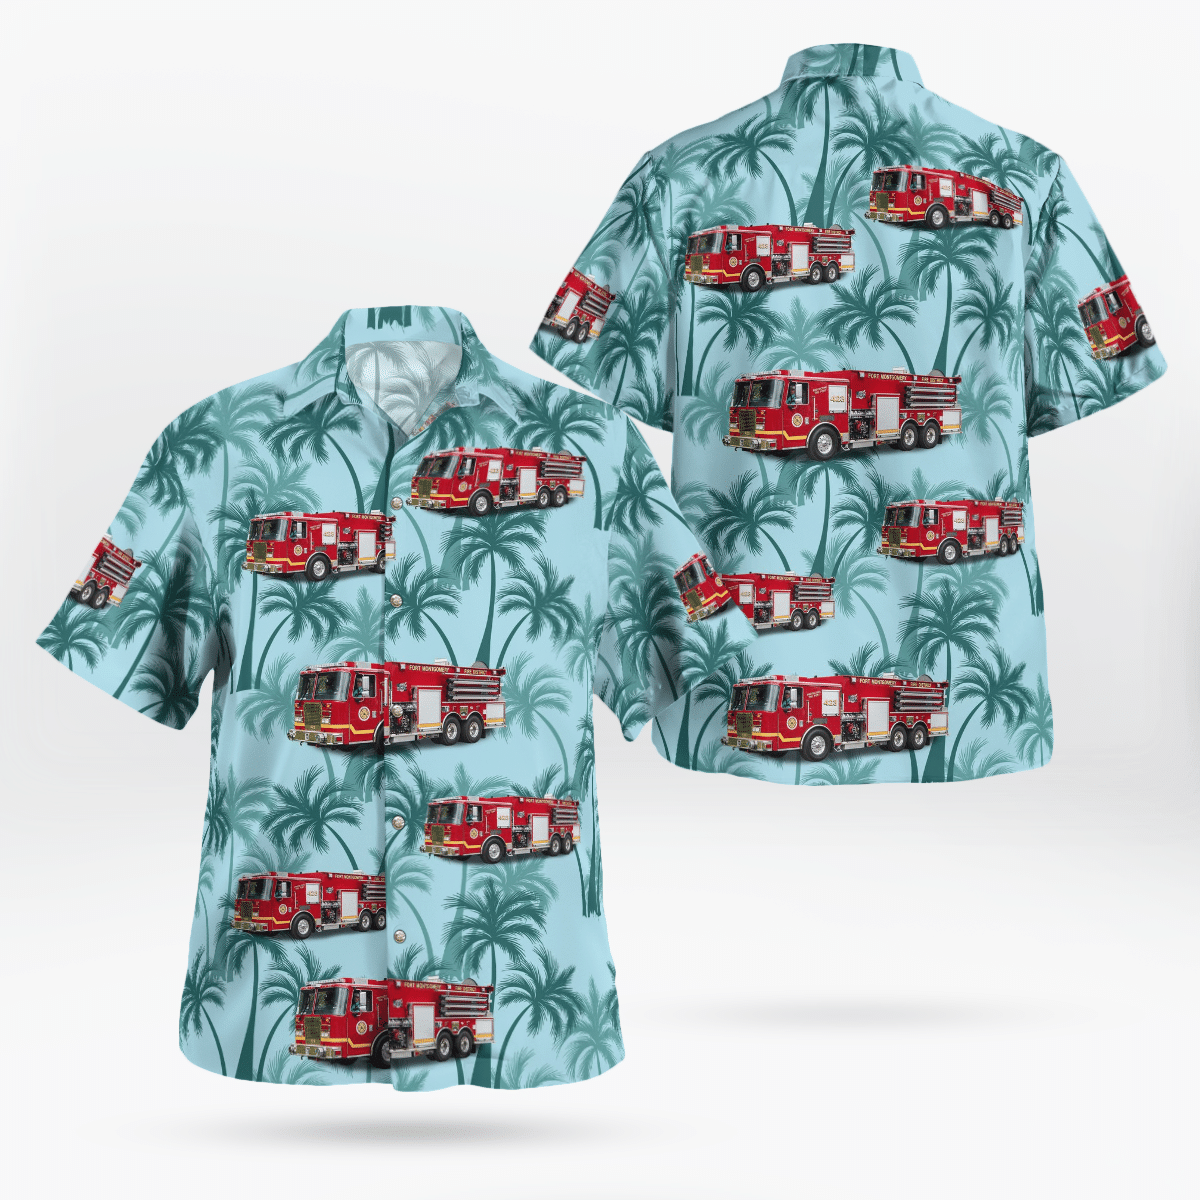 If you want to be noticed, wear These Trendy Hawaiian Shirt 123